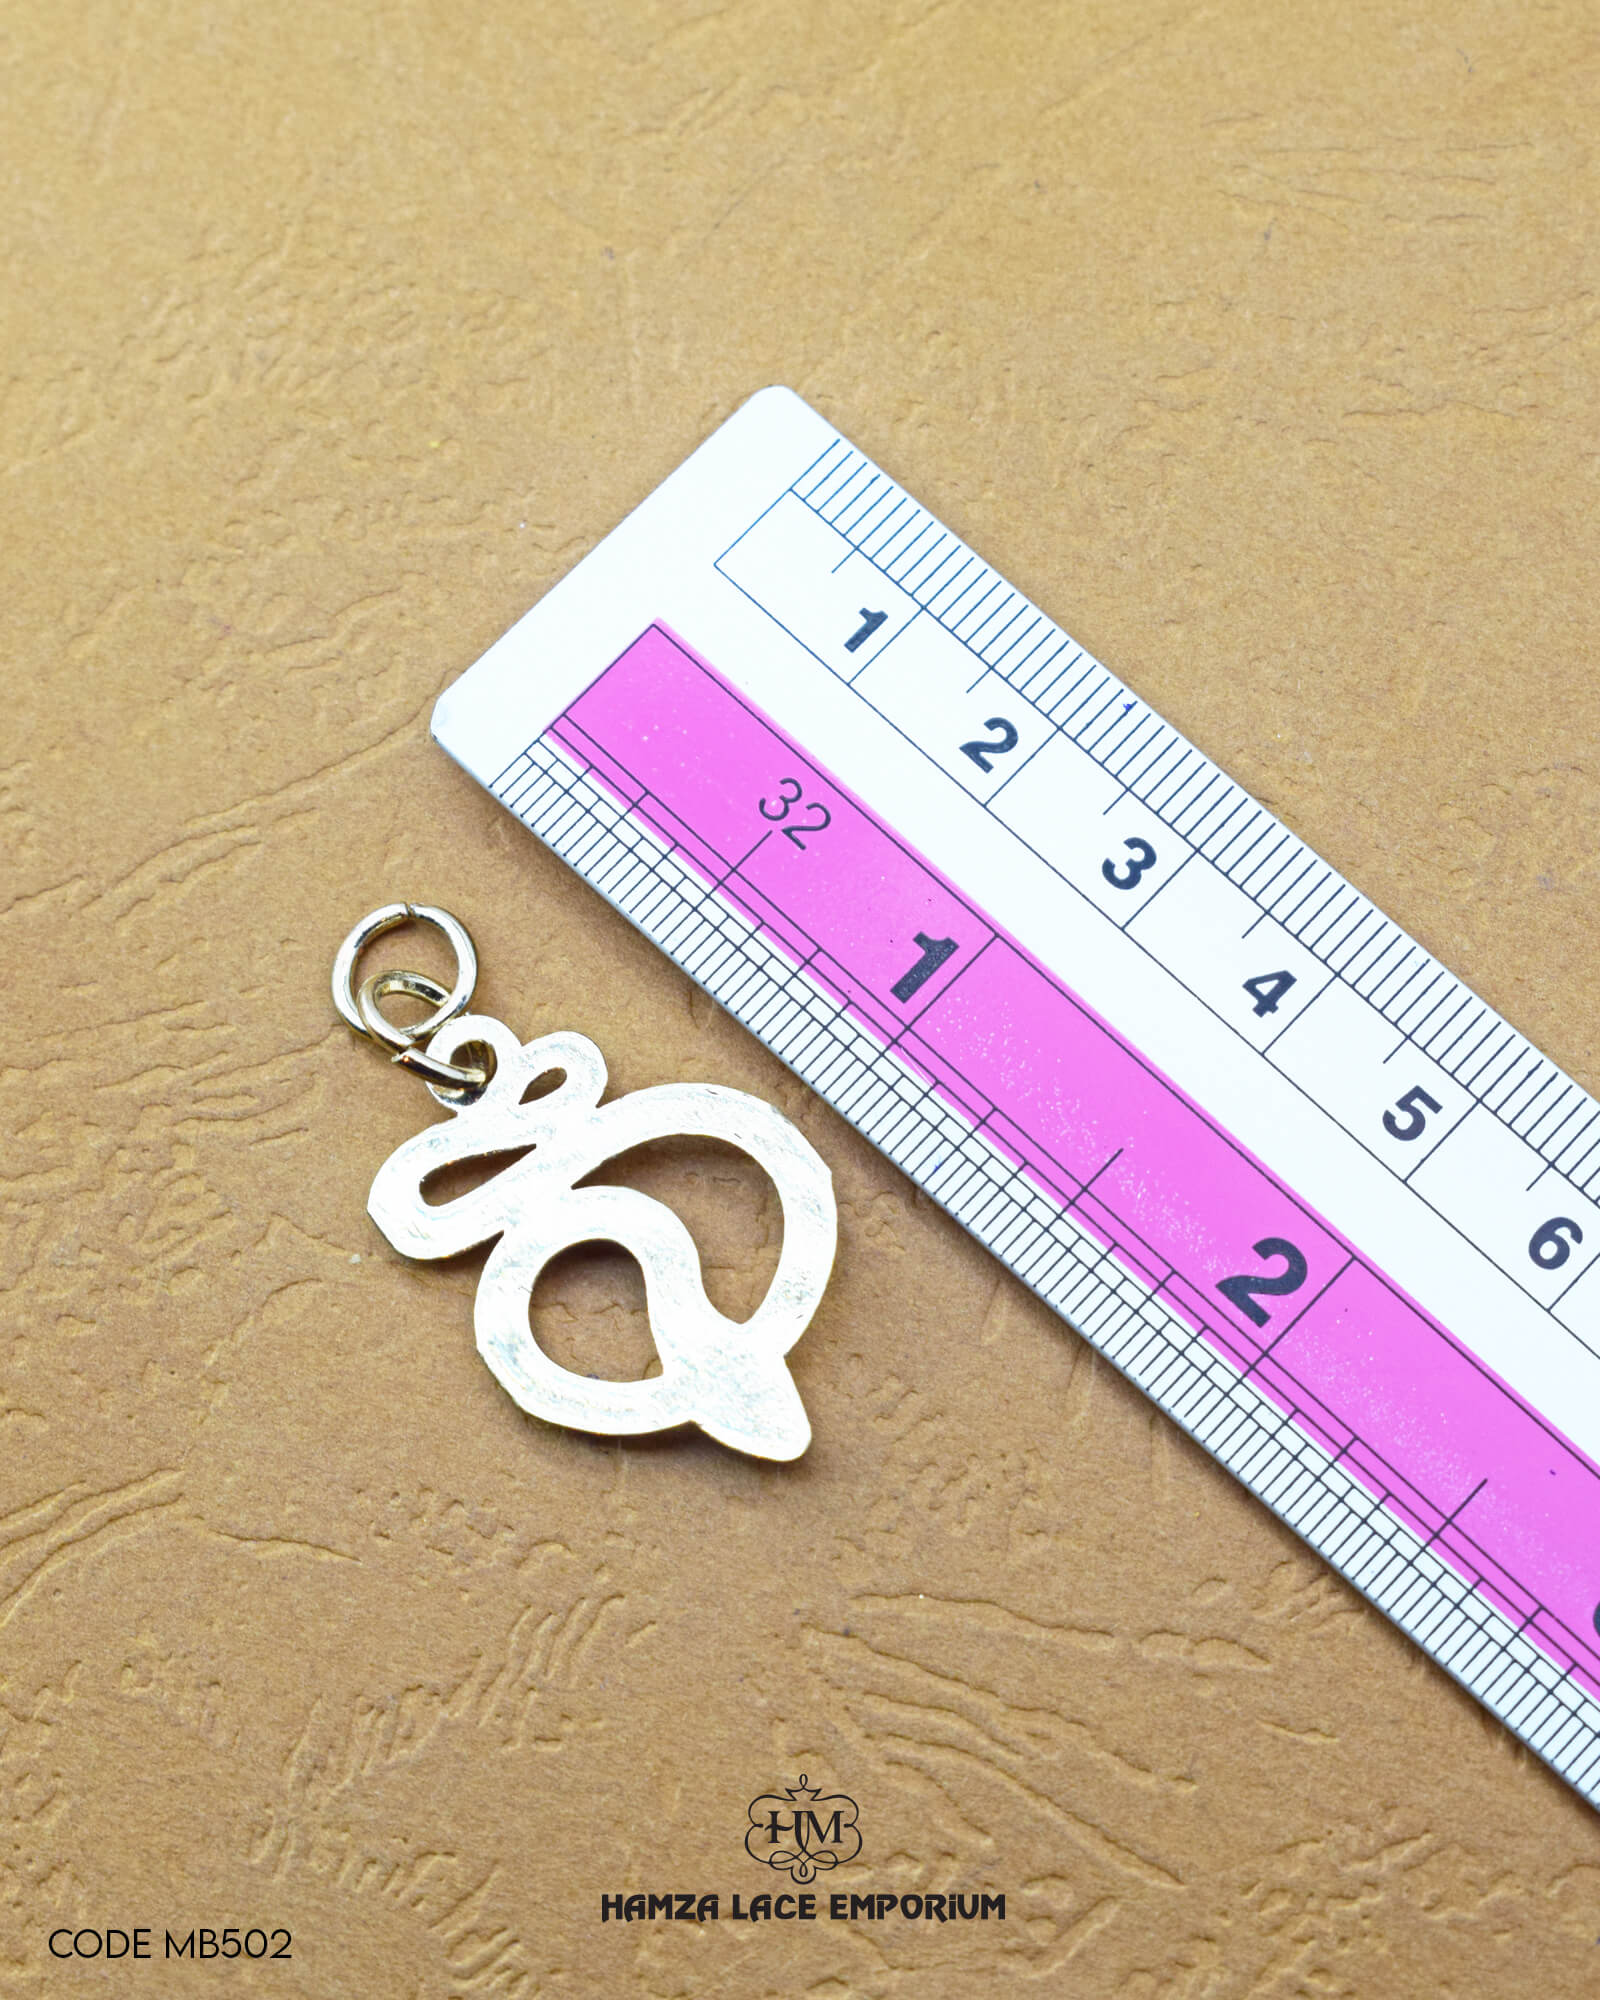 The size of the 'Snake Design Metal Button MB502' is measured using a ruler.